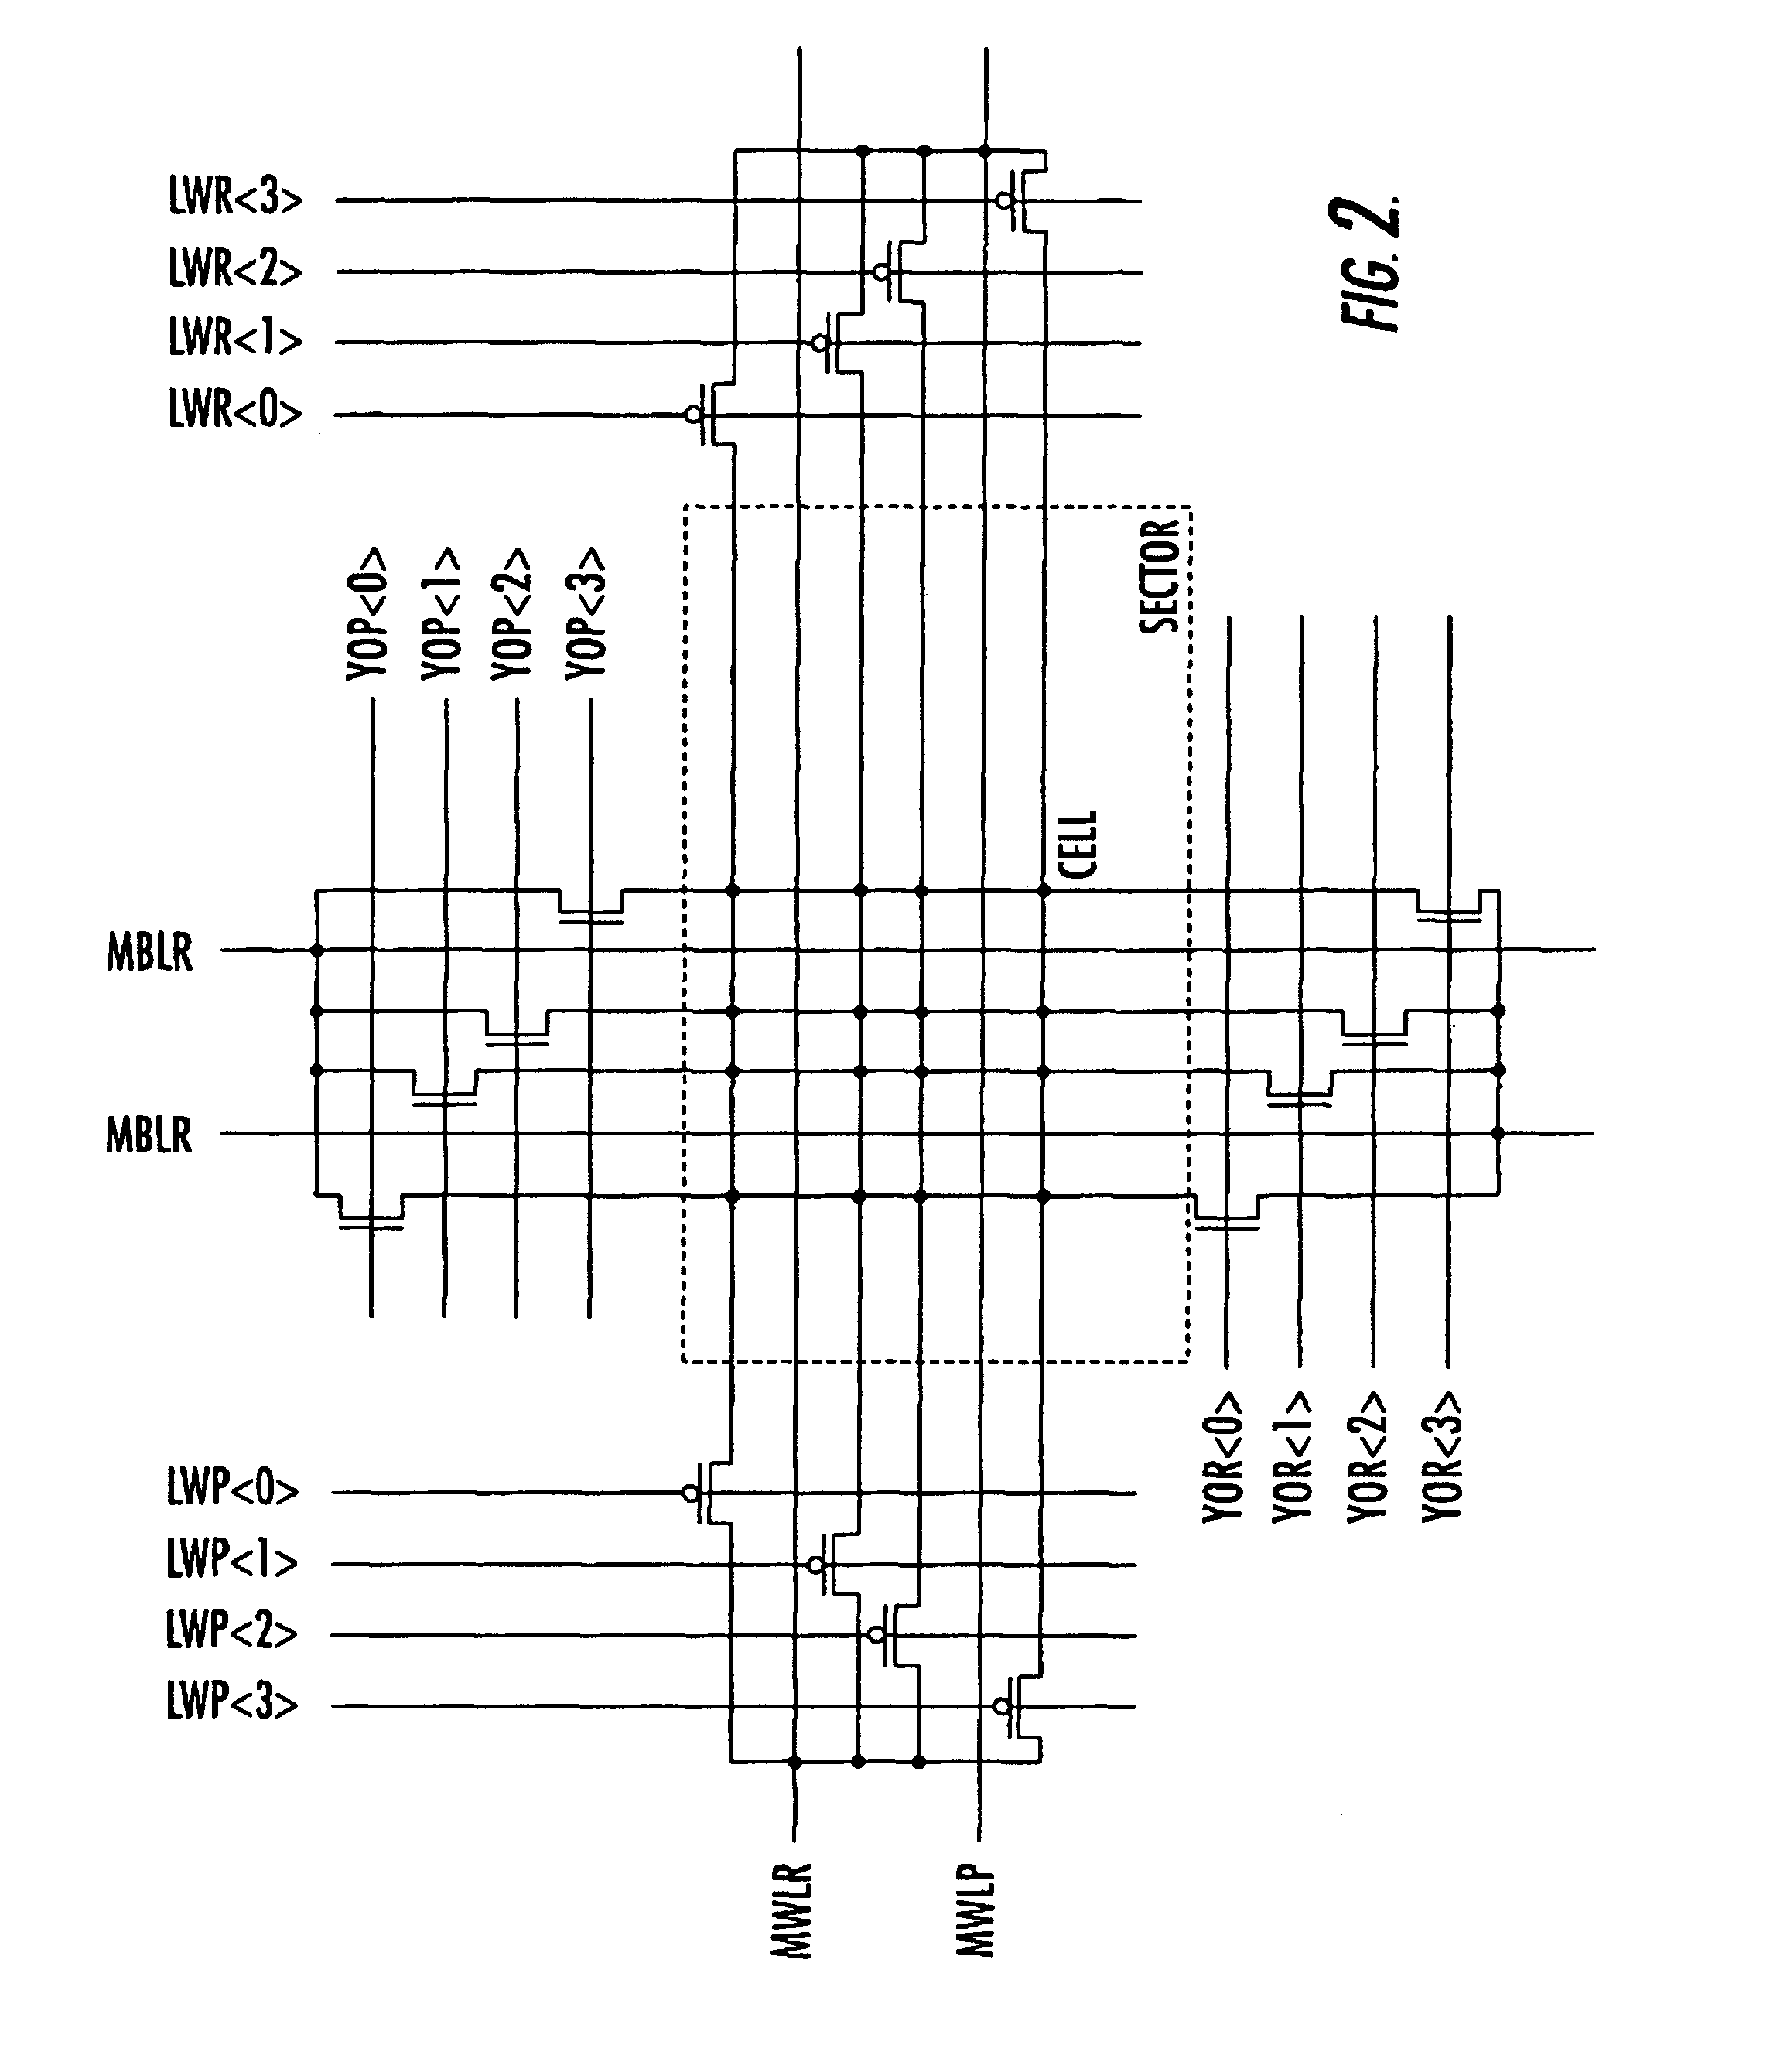 Architecture for a flash-EEPROM simultaneously readable in other sectors while erasing and/or programming one or more sectors